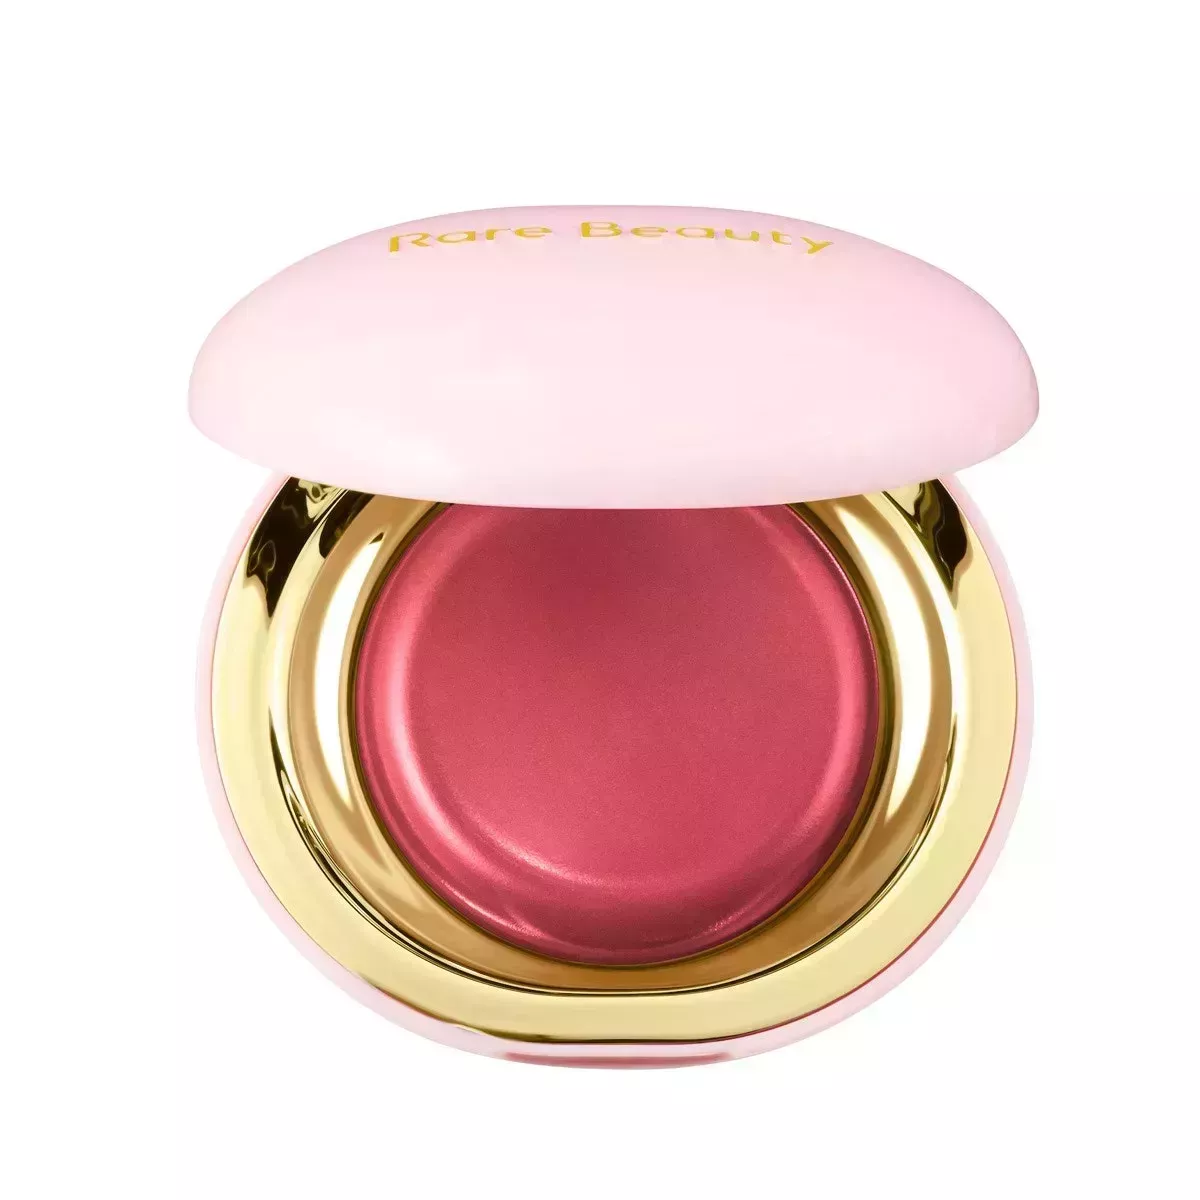 A pink and gold compact with pink blush inside on a white background 